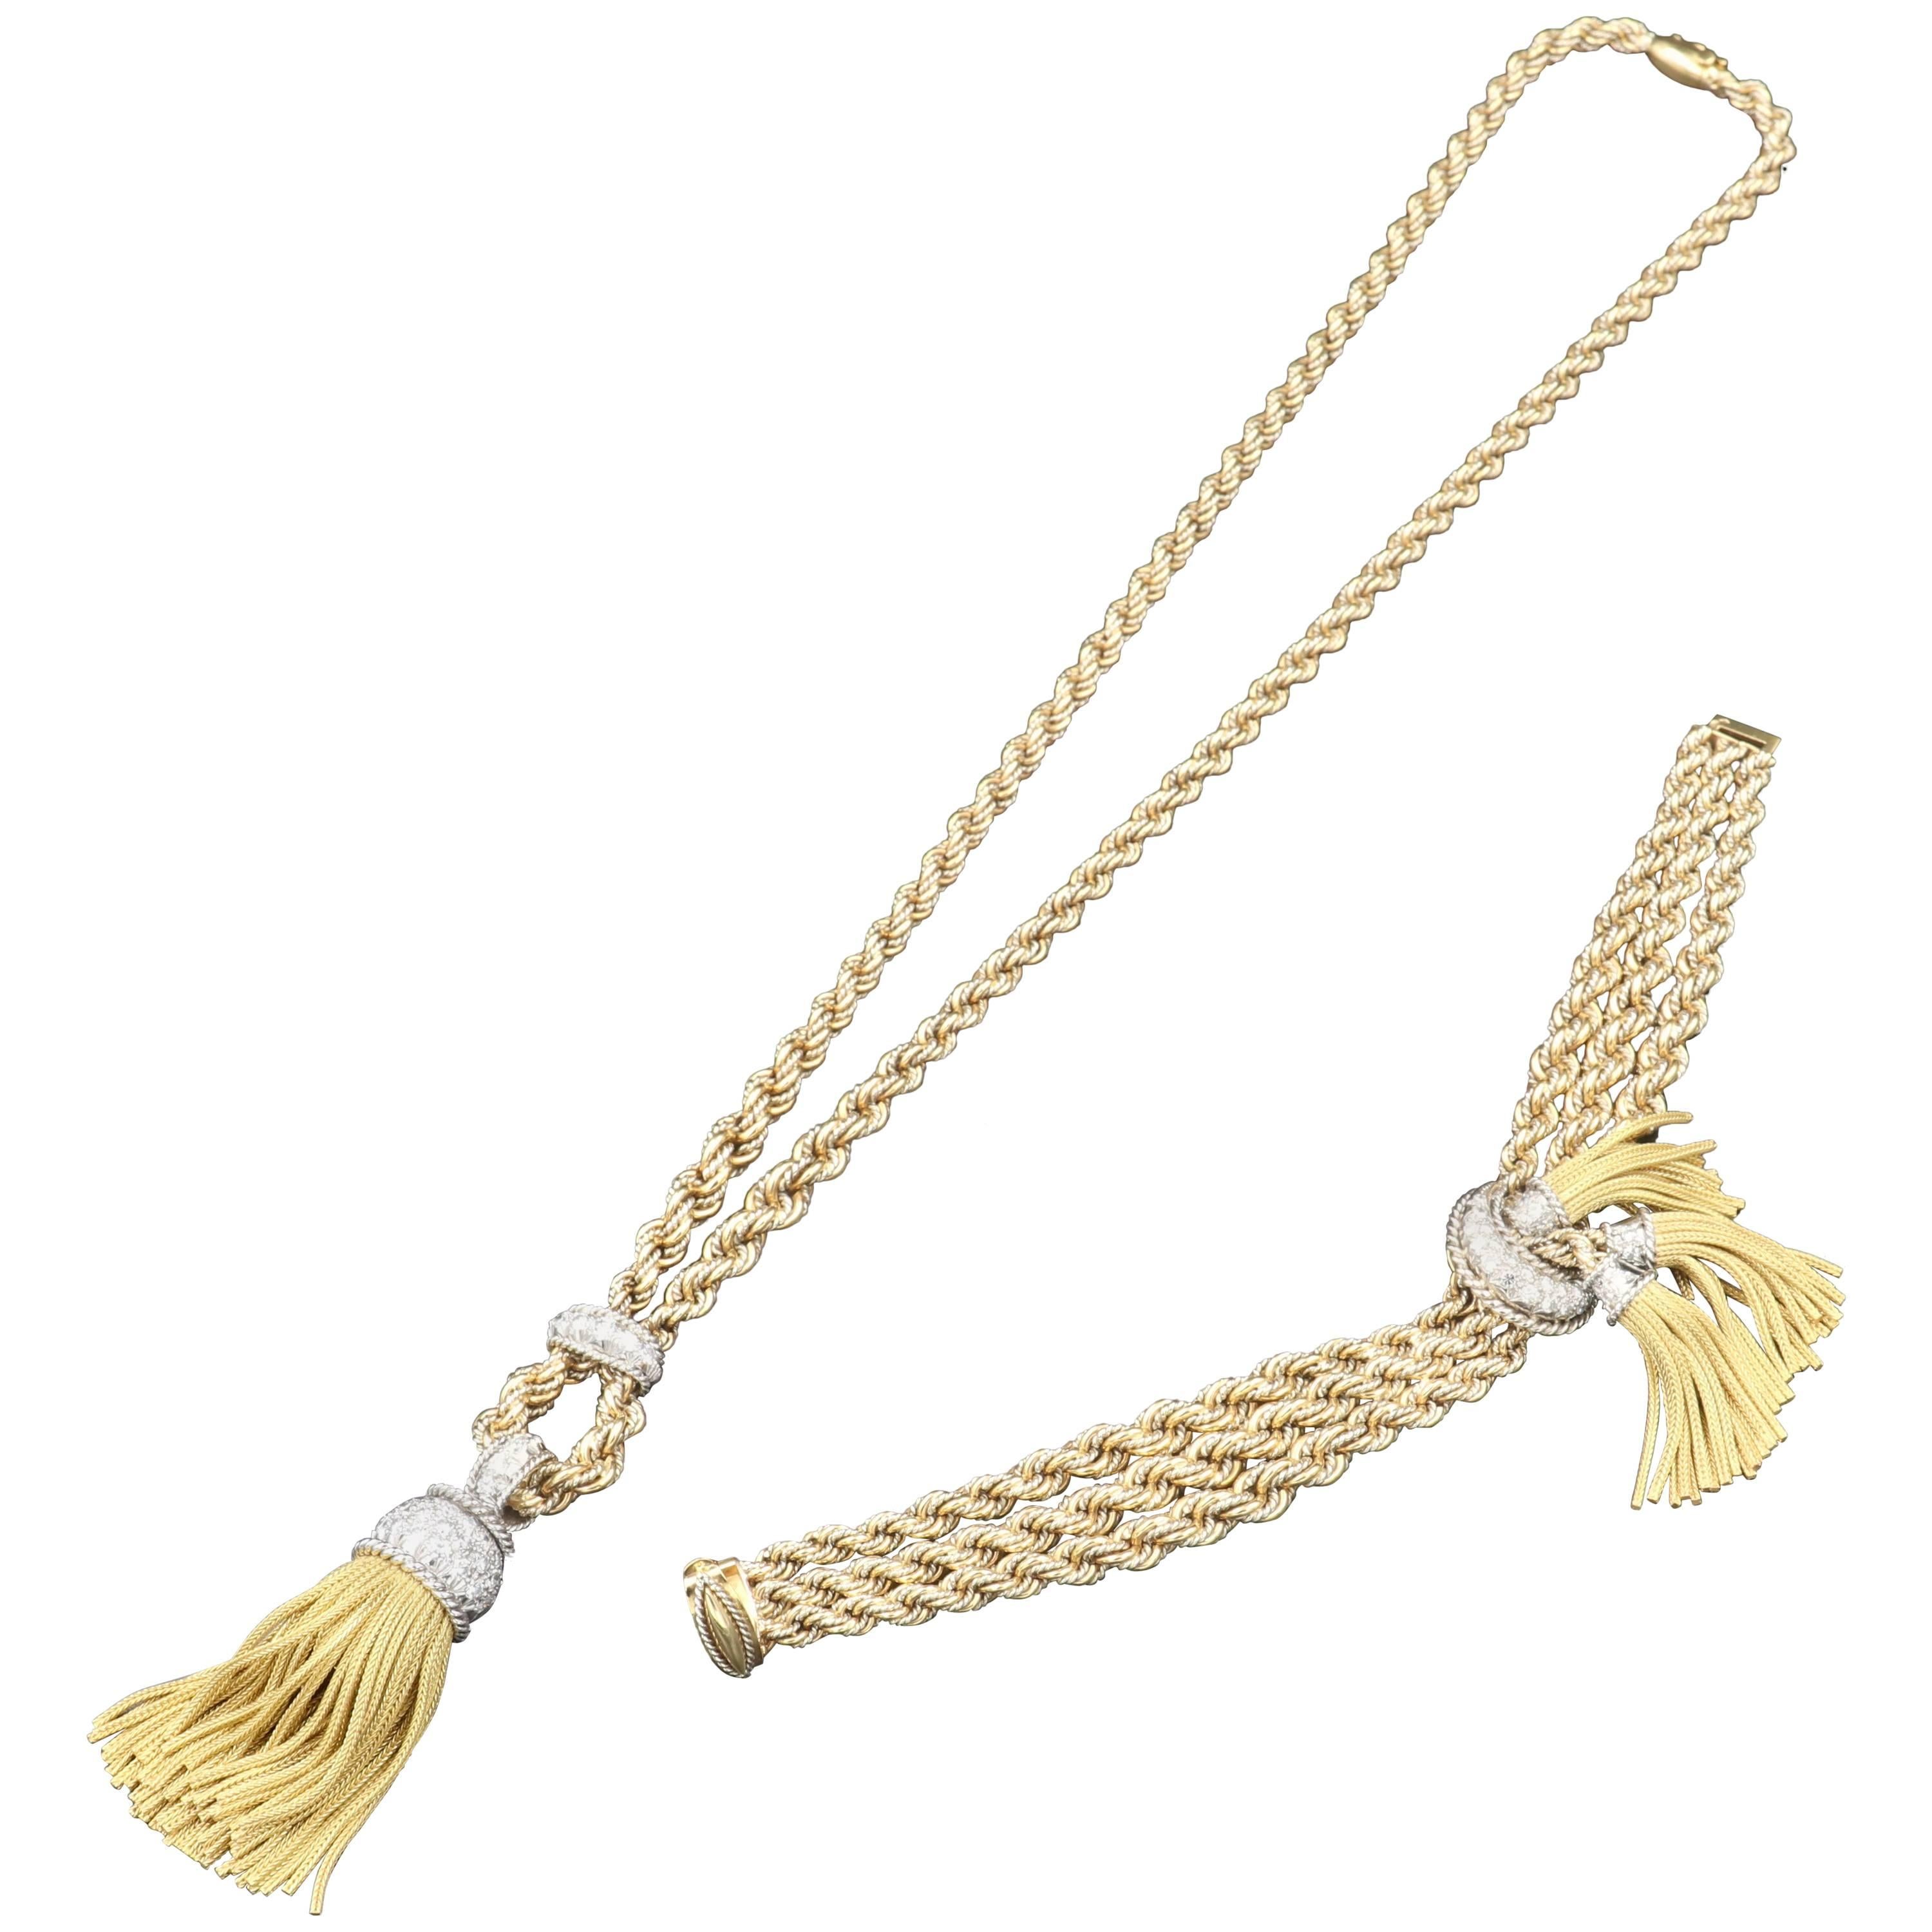 Gold, Platinum and Diamonds French Necklace and Bracelet Set